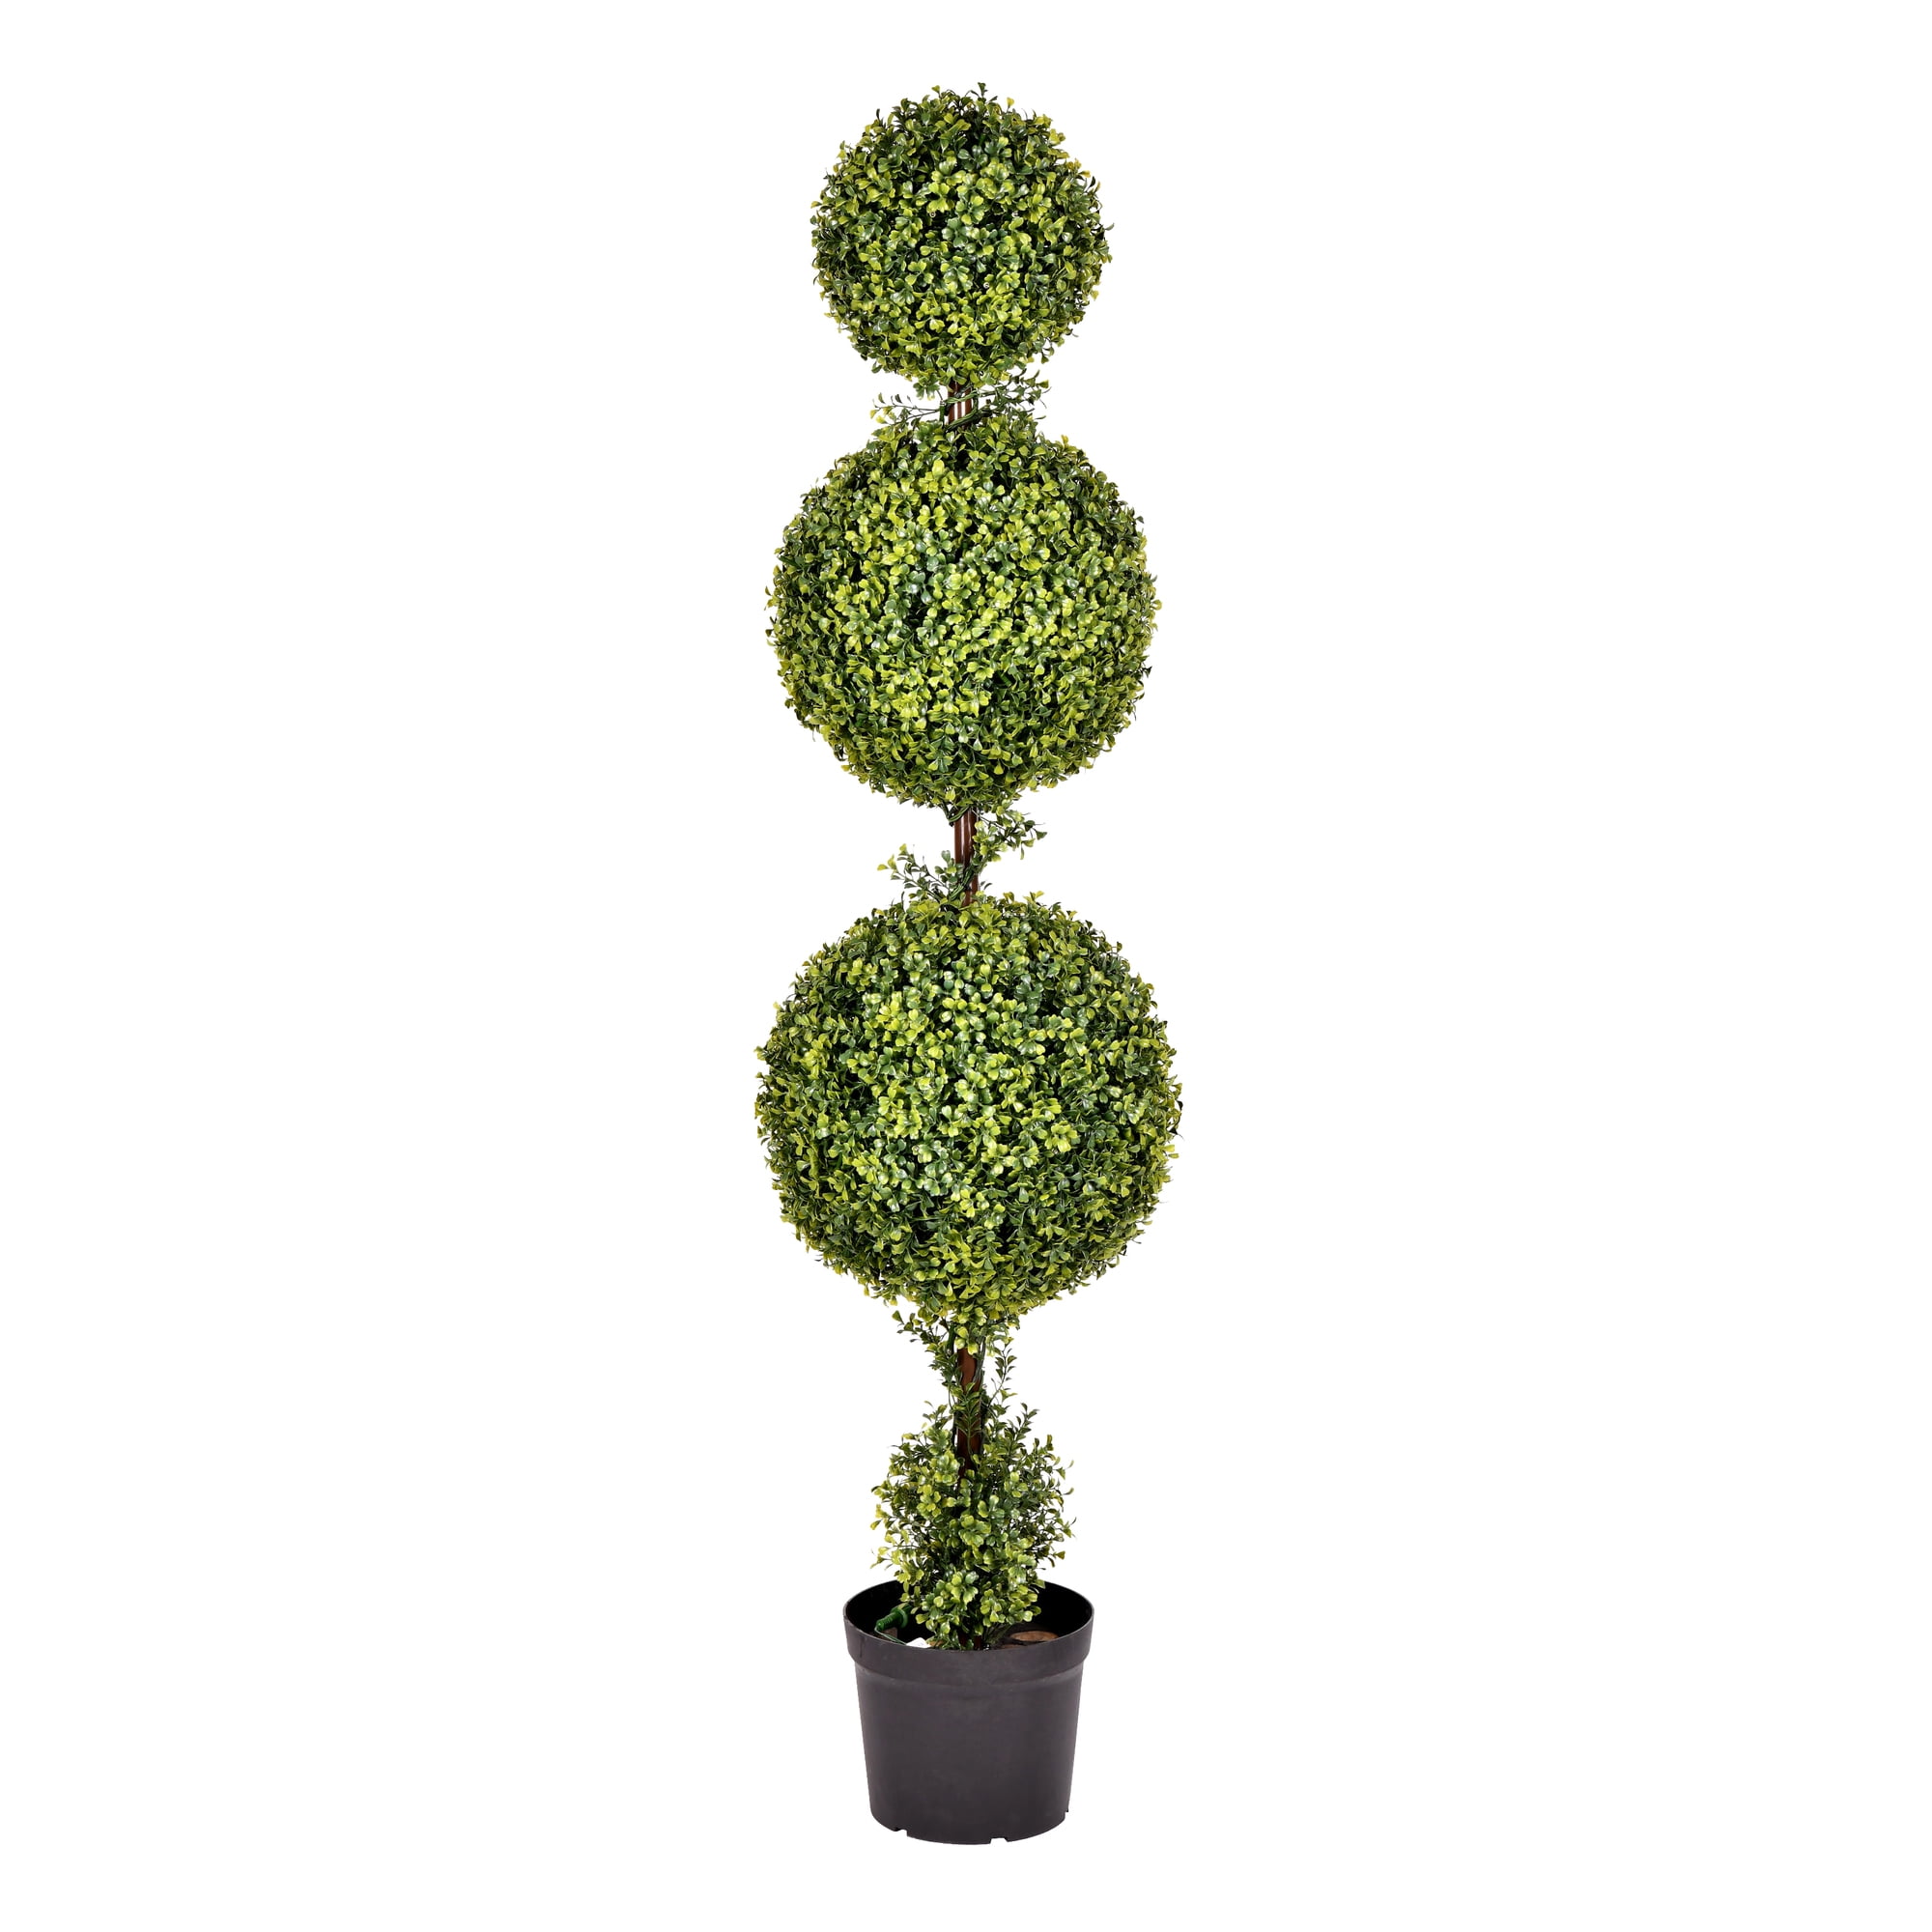 Pair of Triple Ball Artificial Boxwood Buxus Topiary Tree Tower Plant 4FT Potted 